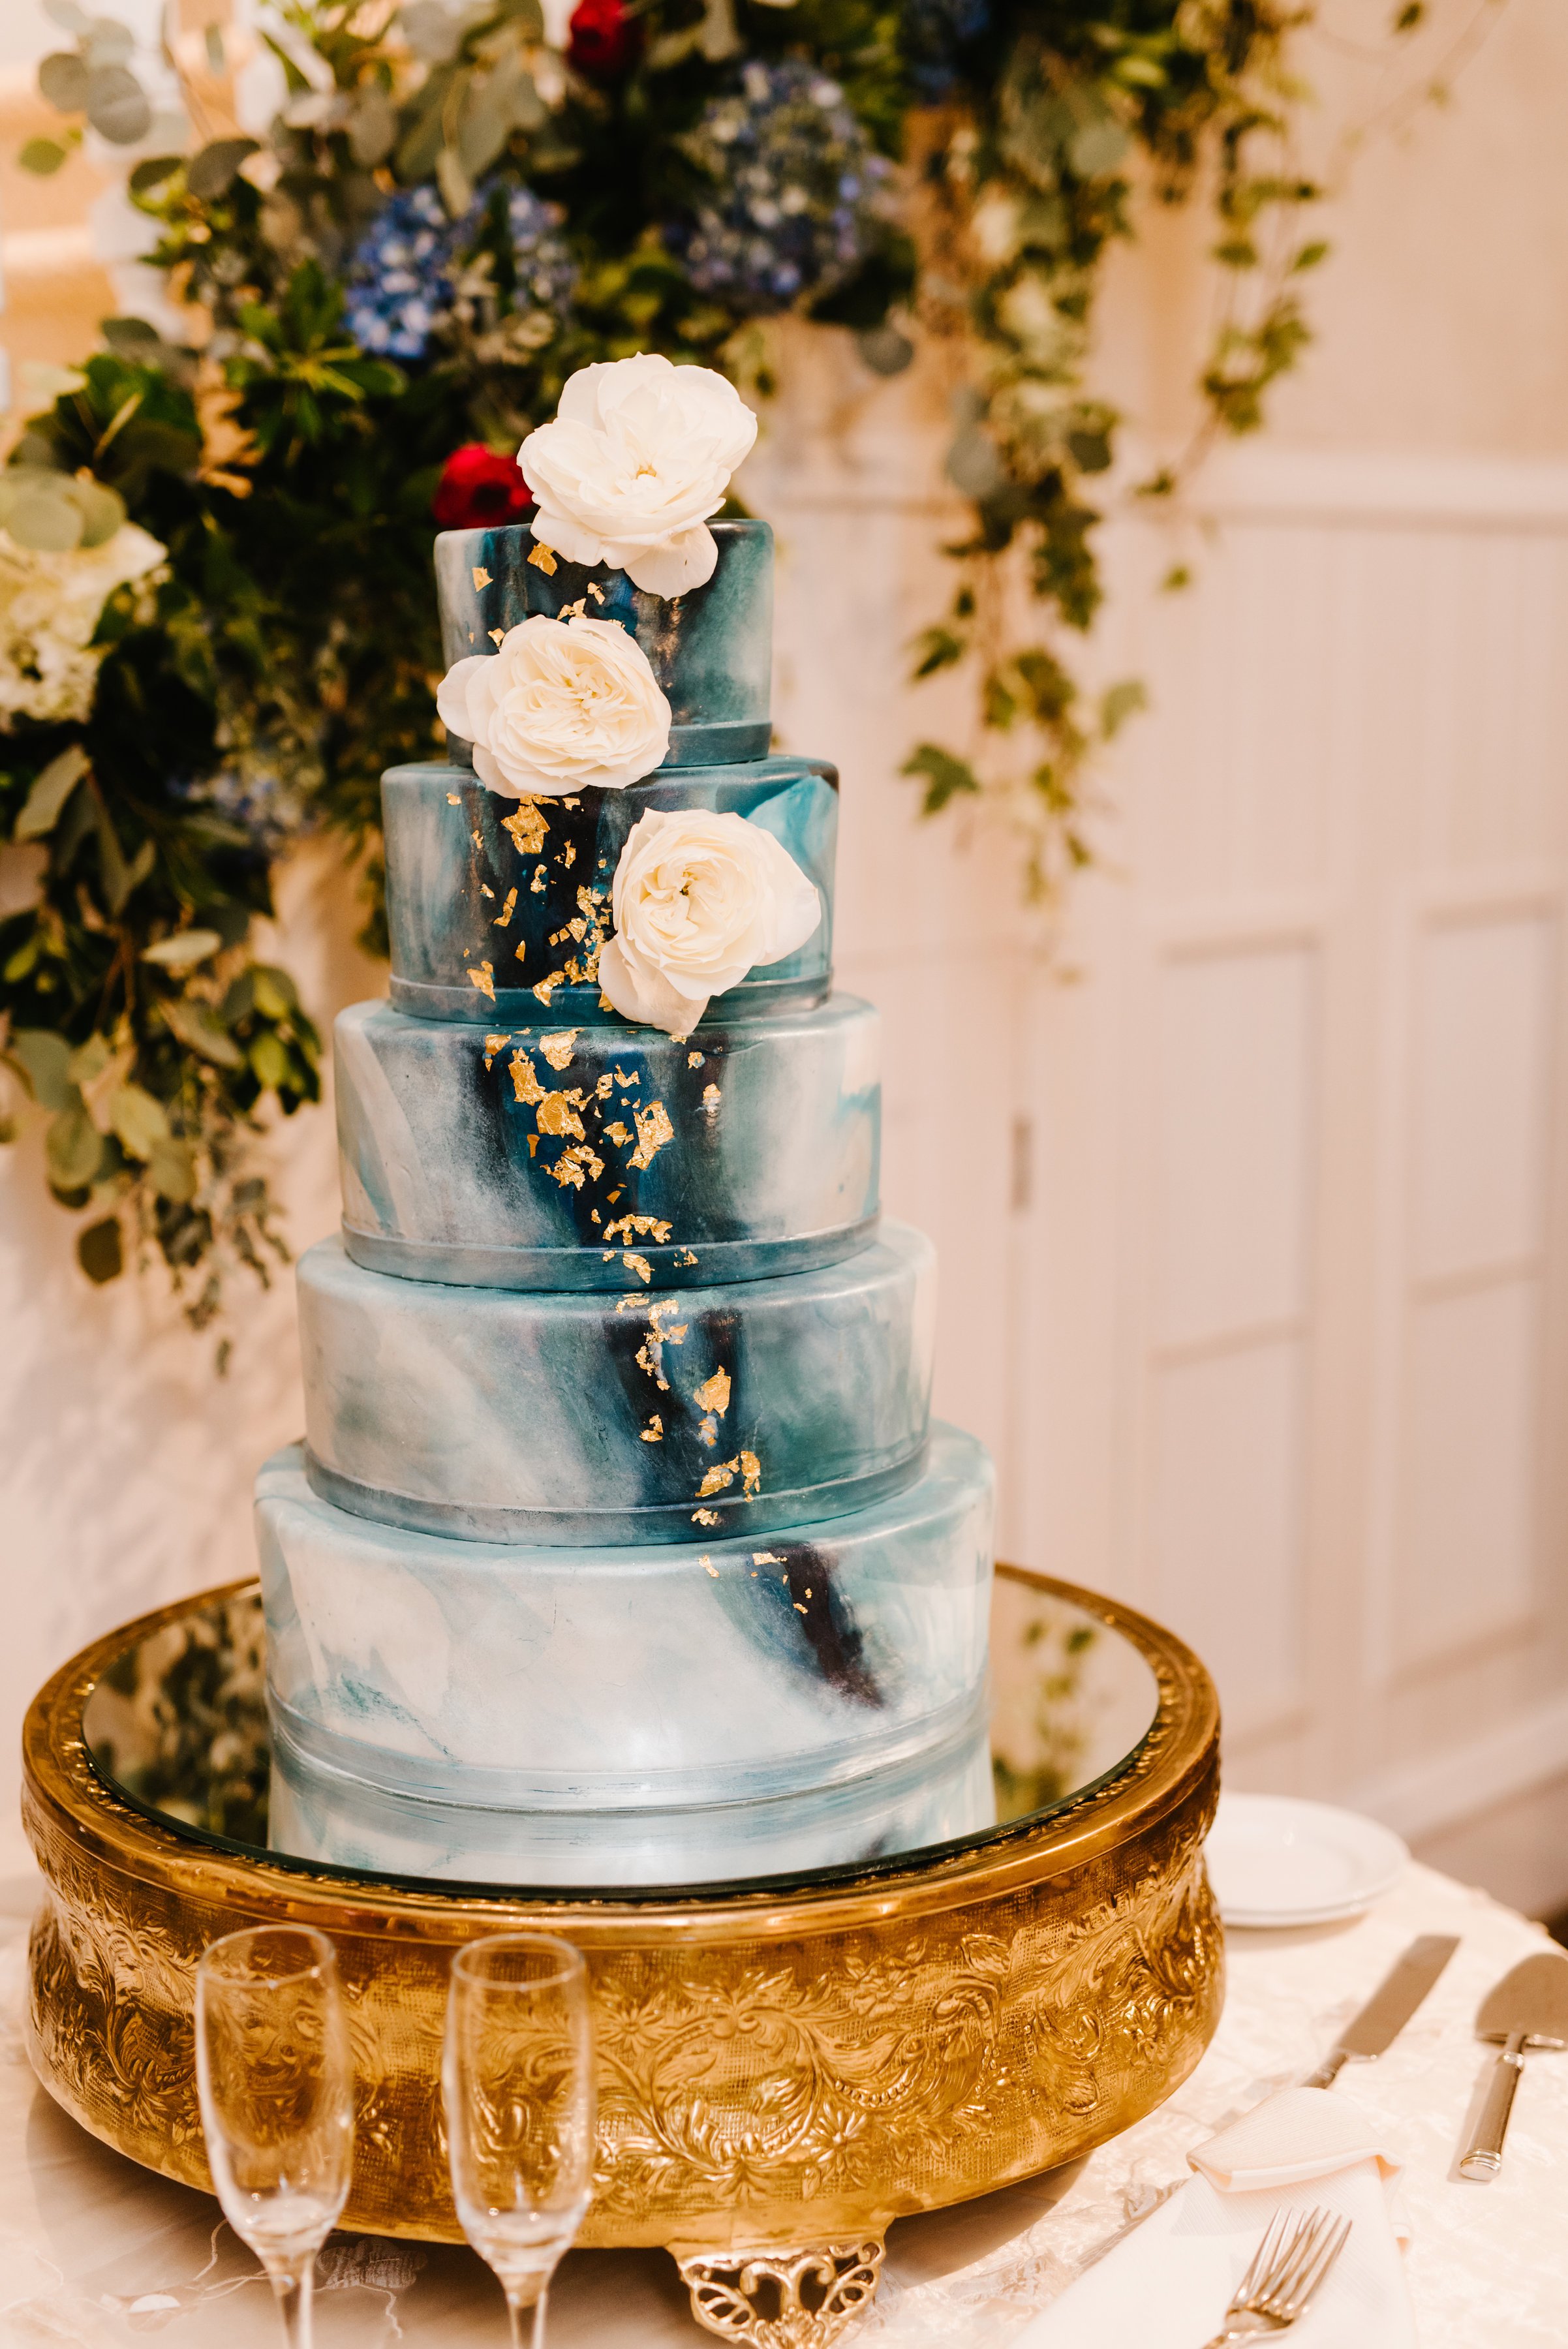 Blue and gold marbled 5 tiered cake with white roses